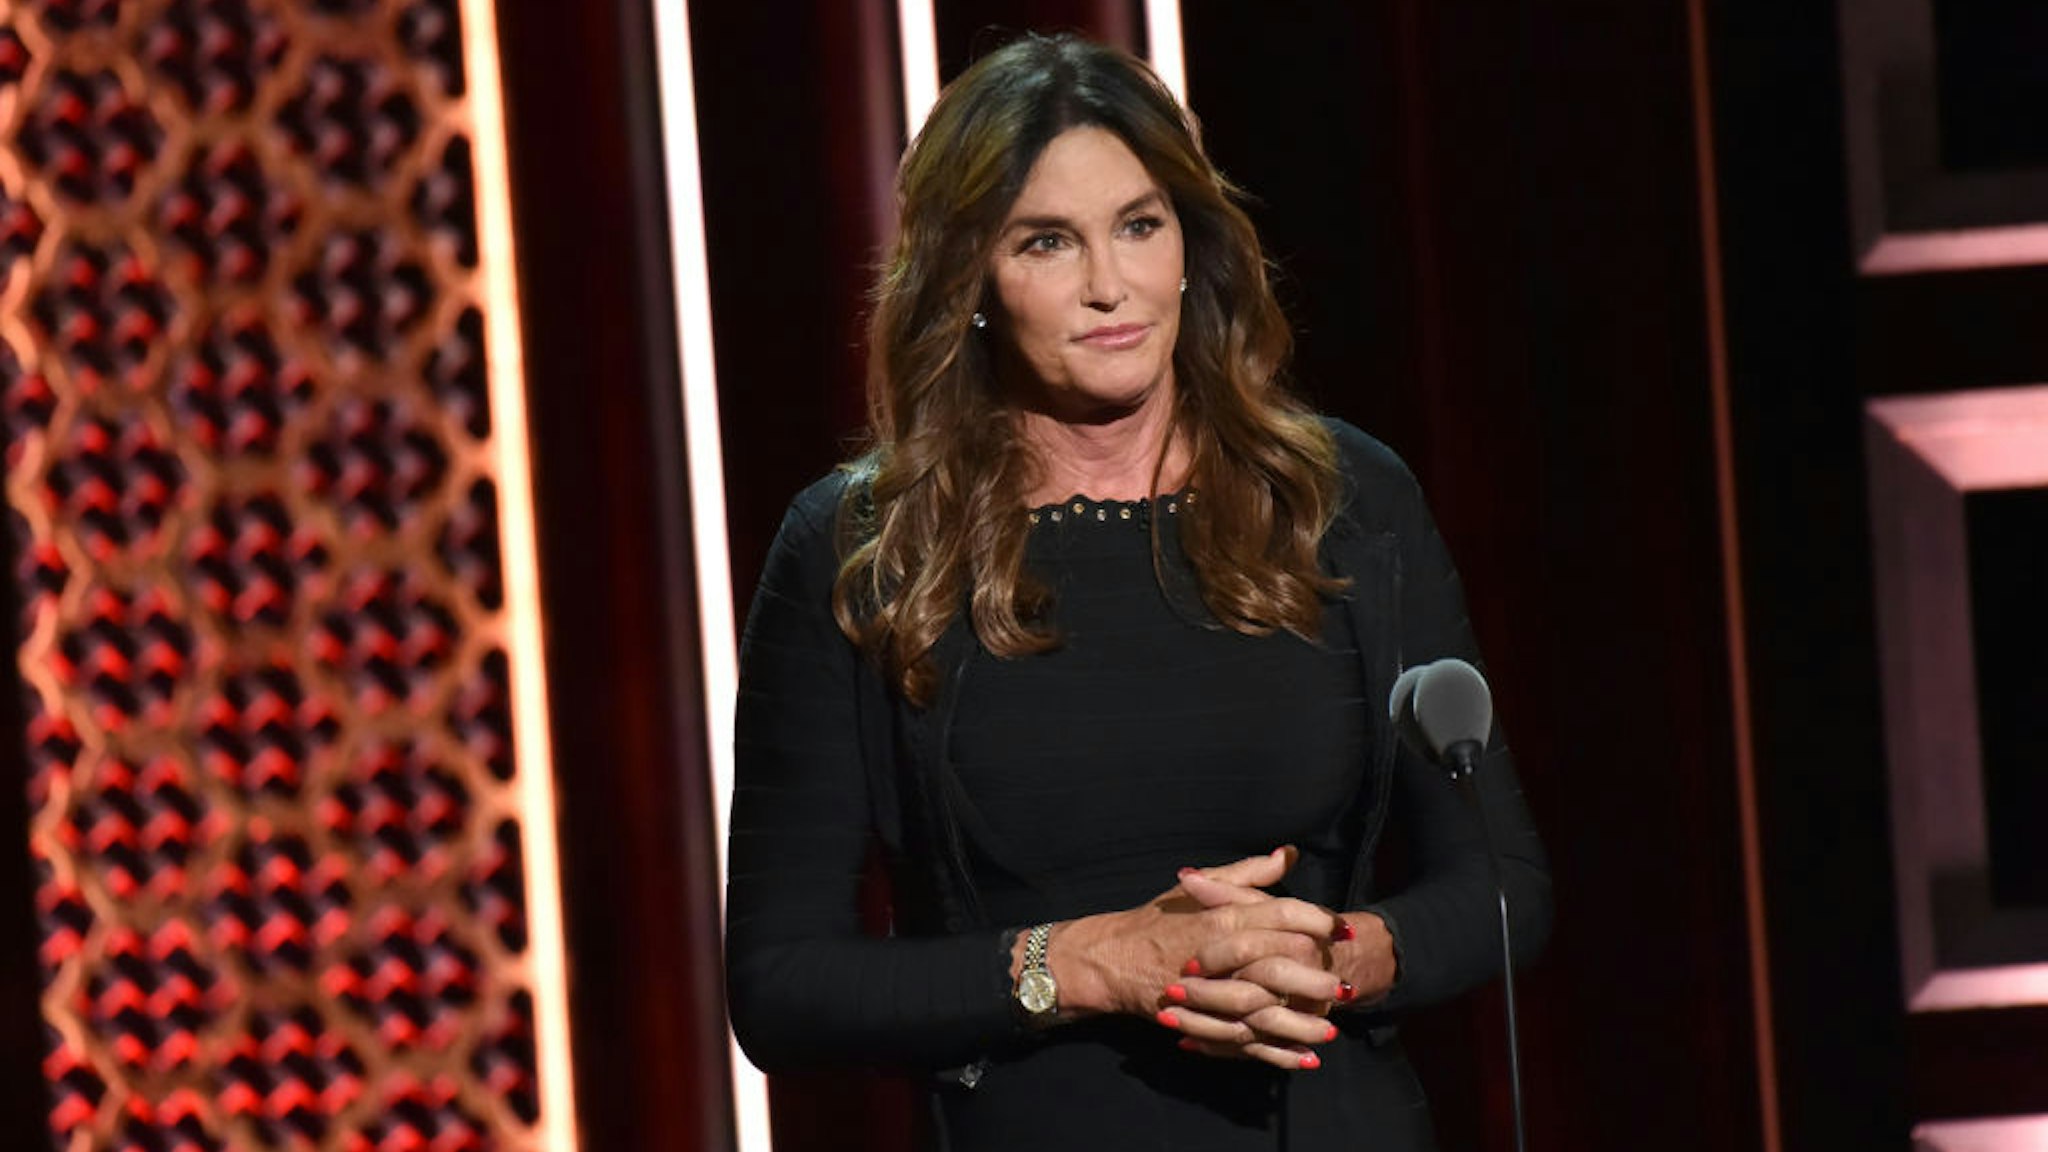 BEVERLY HILLS, CALIFORNIA - SEPTEMBER 07: Caitlyn Jenner speaks onstage during the Comedy Central Roast of Alec Baldwin at Saban Theatre on September 07, 2019 in Beverly Hills, California. (Photo by Jeff Kravitz/FilmMagic)